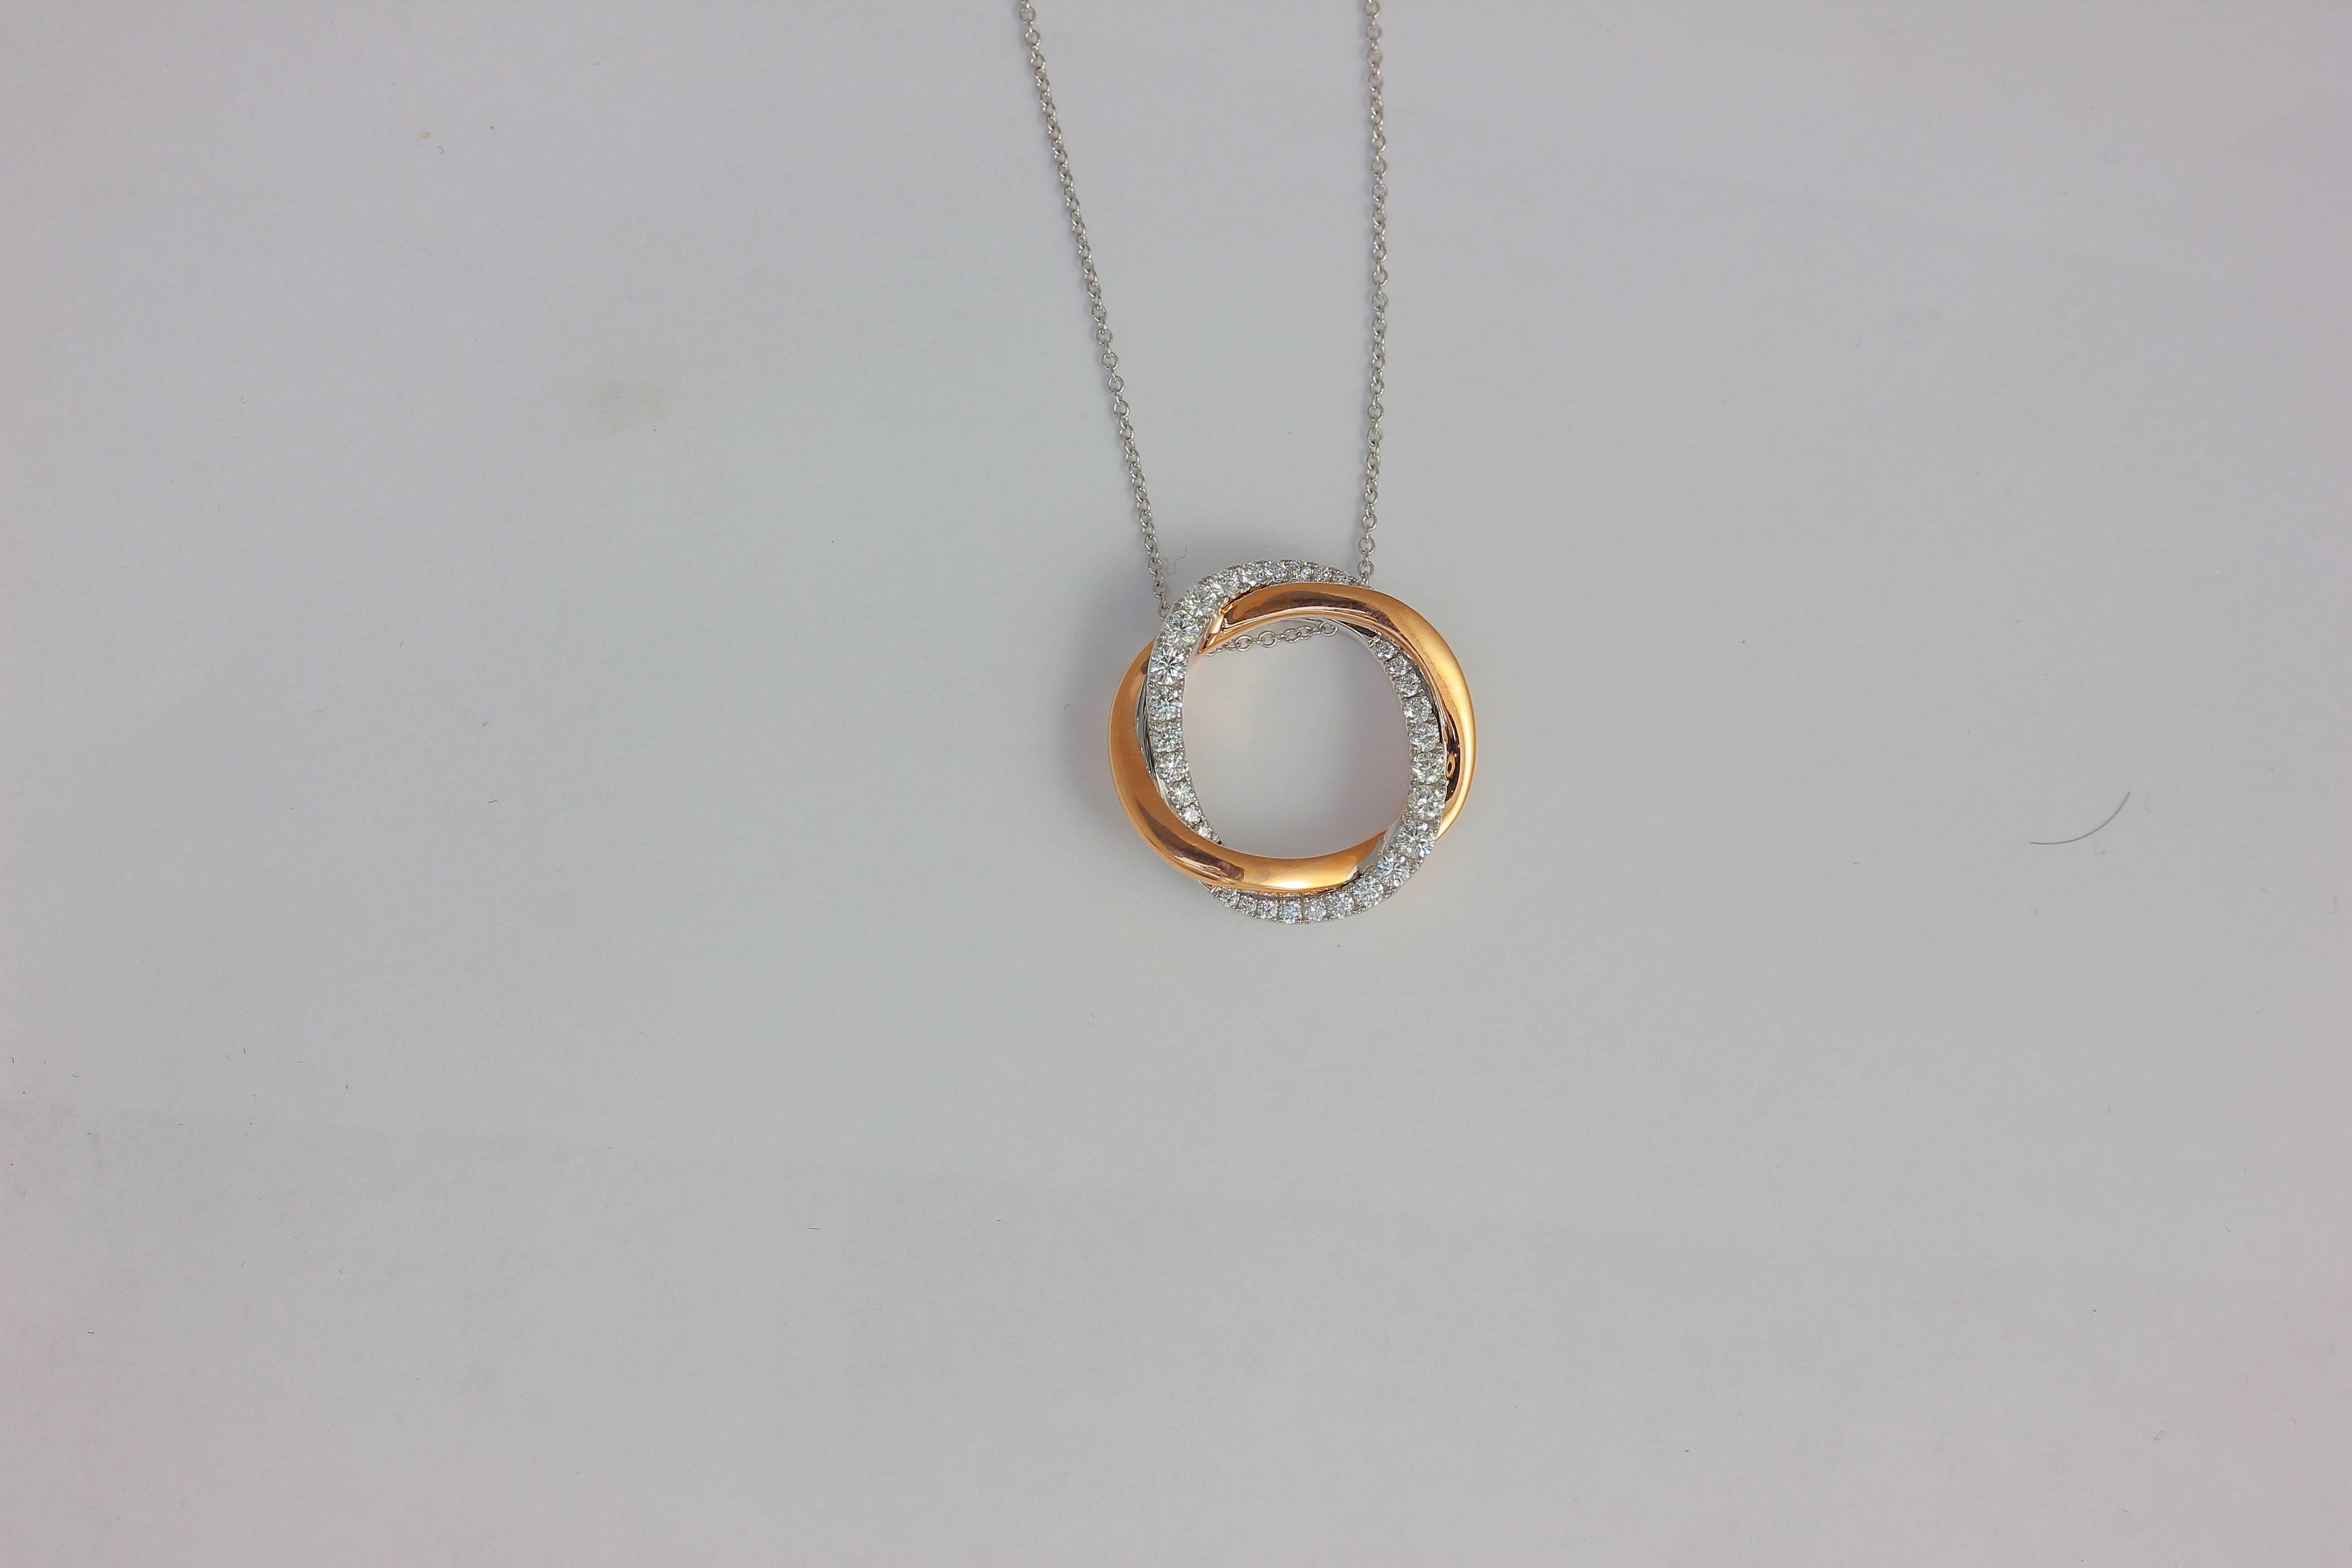 14K PWG LARGE TWIST HALO DIAMOND IN WG AND POLISHED PG PENDANT WITH CHAIN
32 Diamonds  0.54 Carats